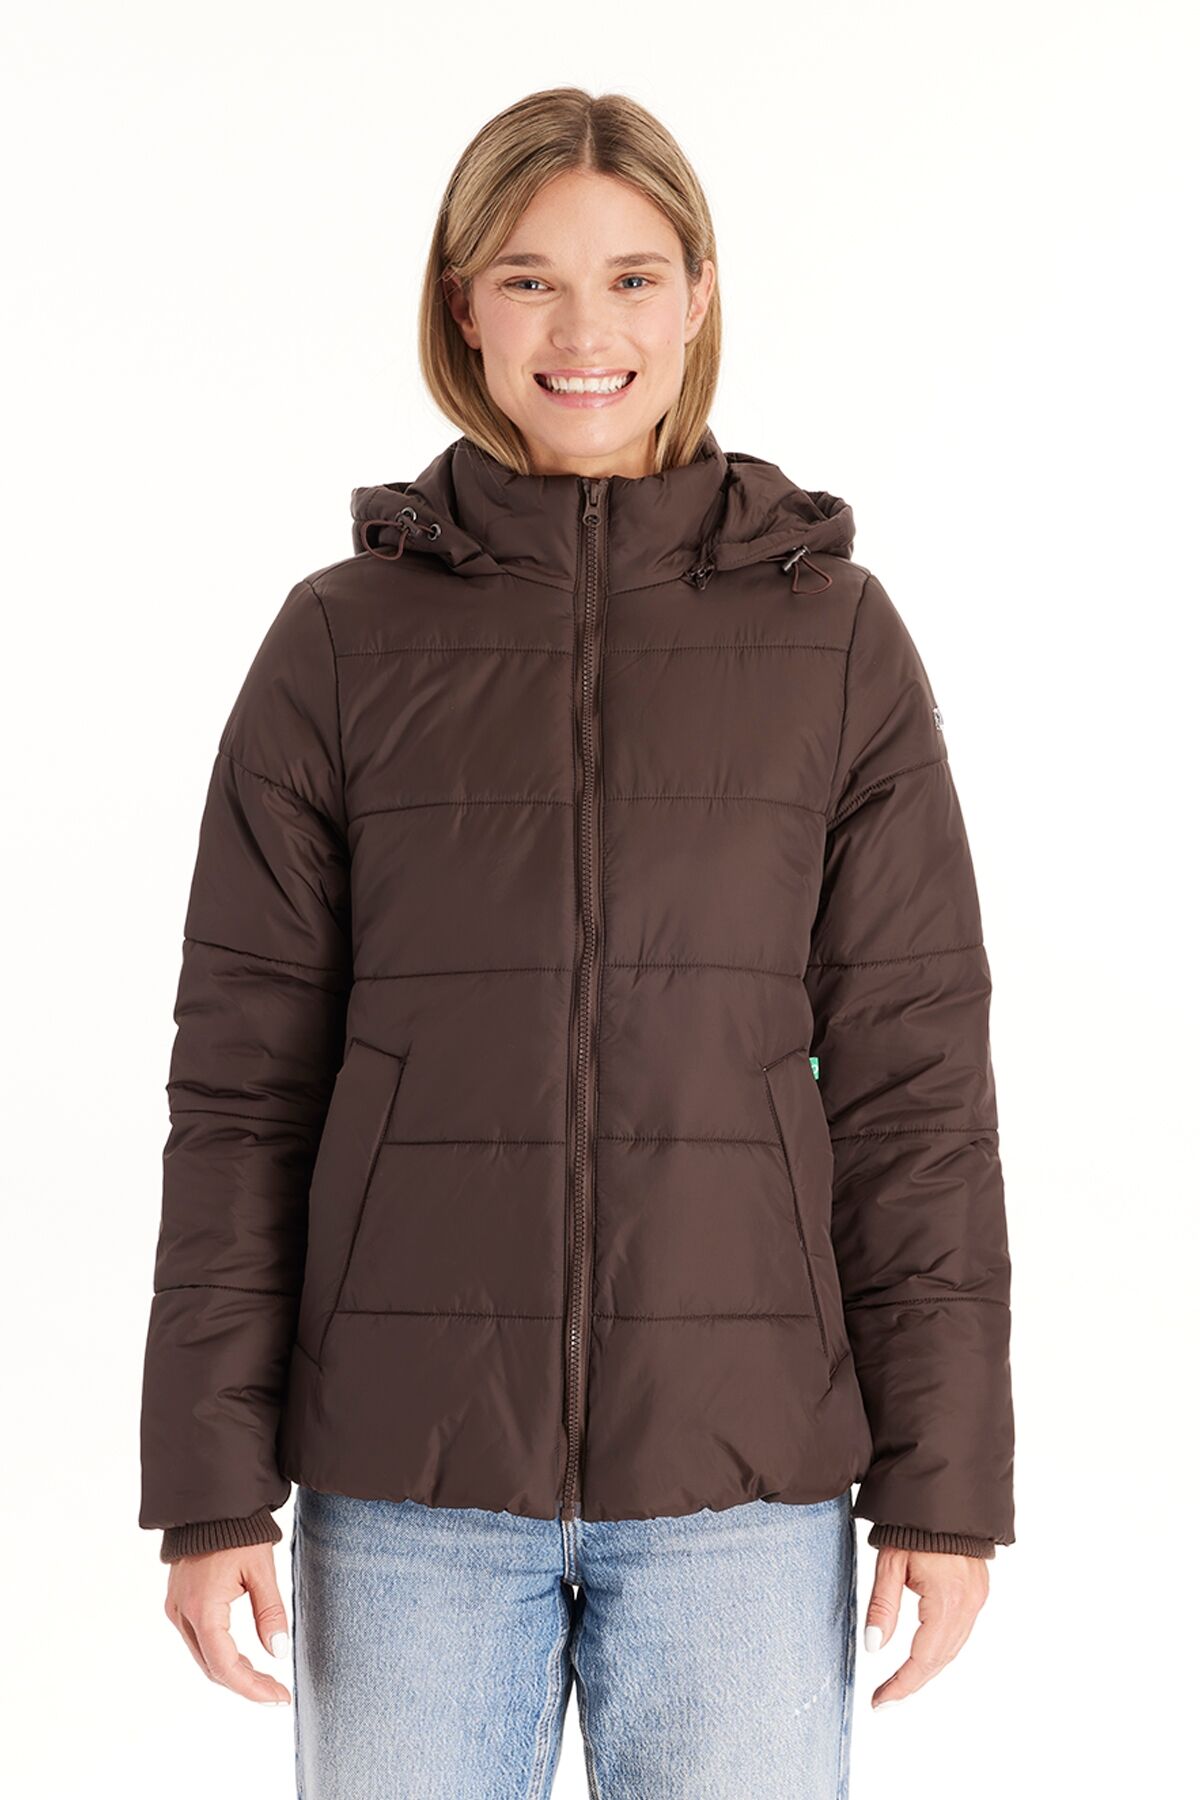 Modern Eternity Maternity Maternity Leia - 3in1 Bomber Puffer Jacket Quilted Hybrid - Dark chocolate